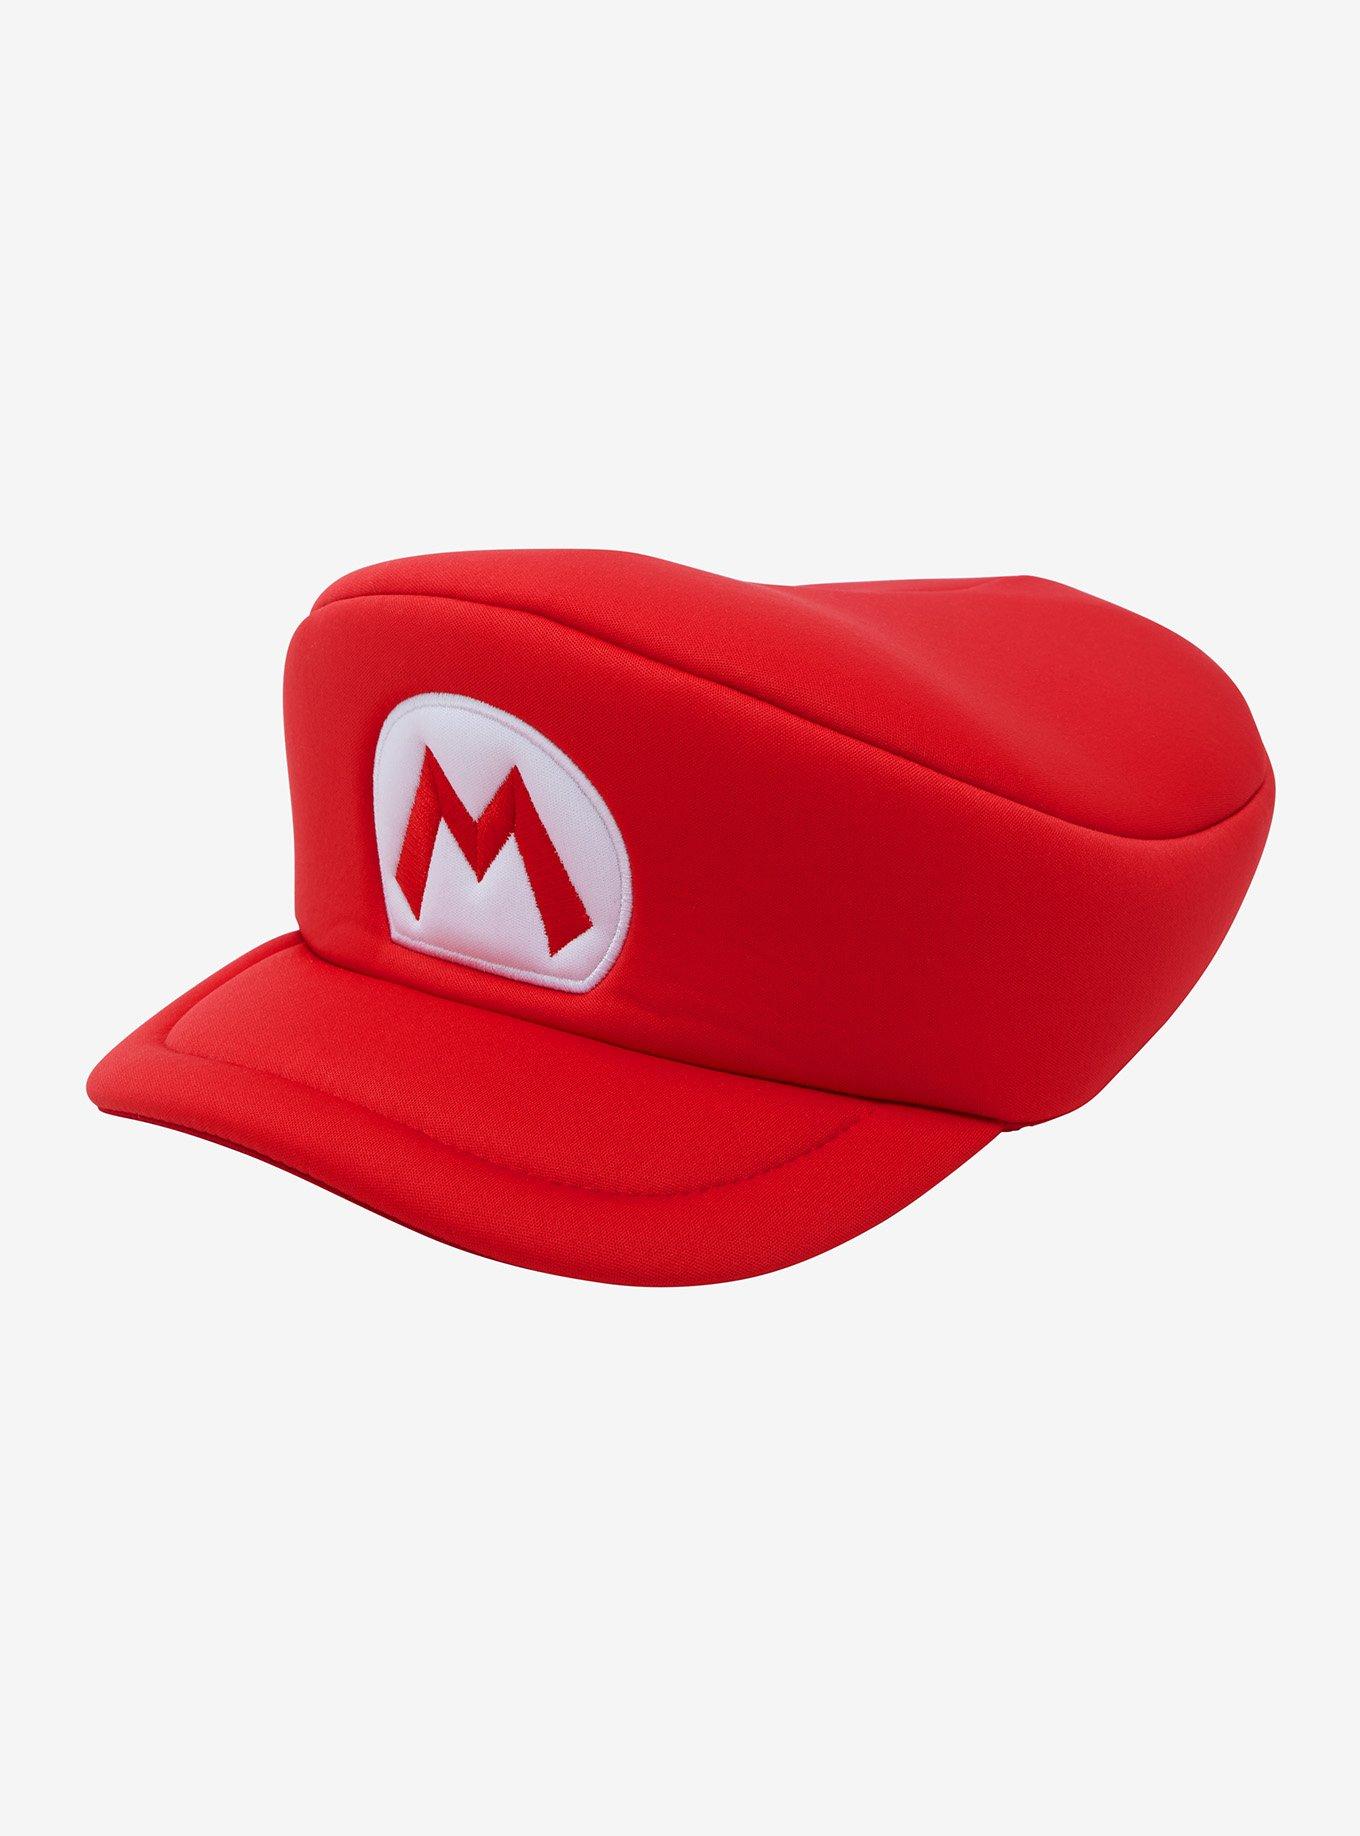 Super Mario Odyssey Hats list - hat prices and how to unlock every